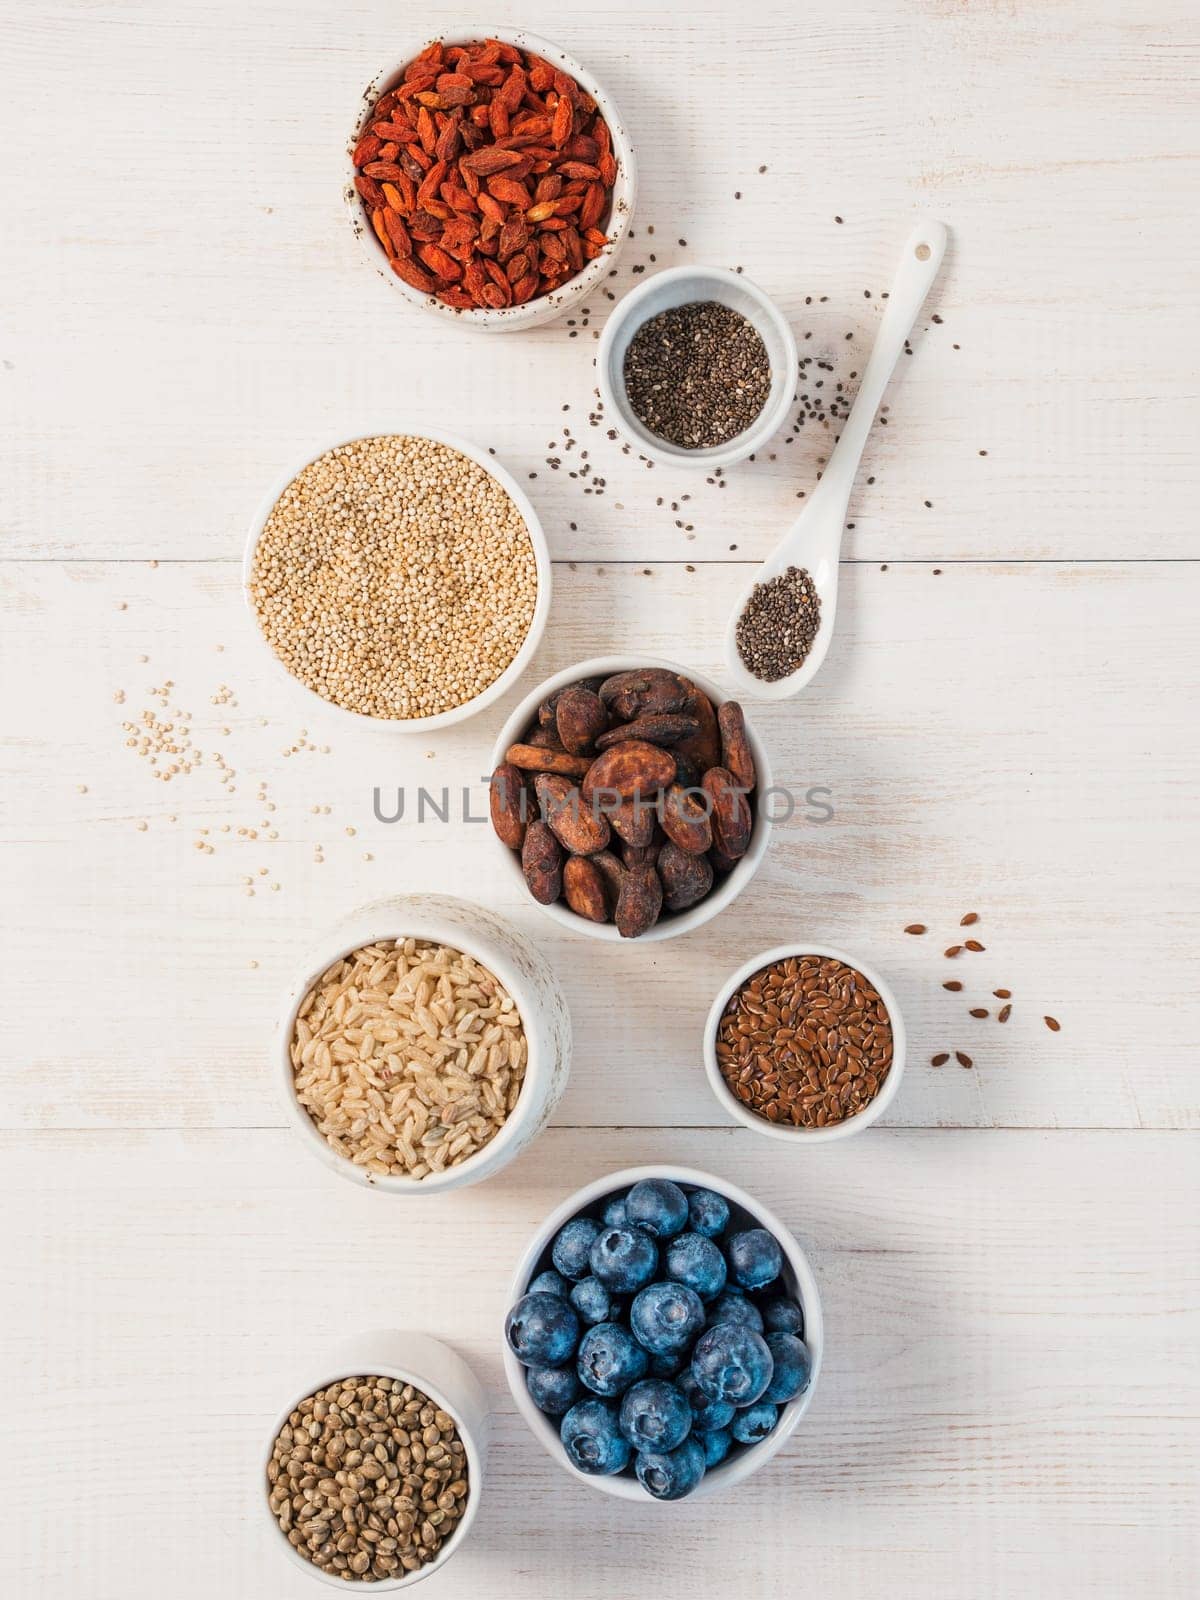 Various superfoods in small bowl on white wooden table.Selection super food.Superfood as blueberry, chia, raw cocoa bean, goji, hemp seeds, quinoa, brown rice. Copy space.Top view or flat lay.Vertical